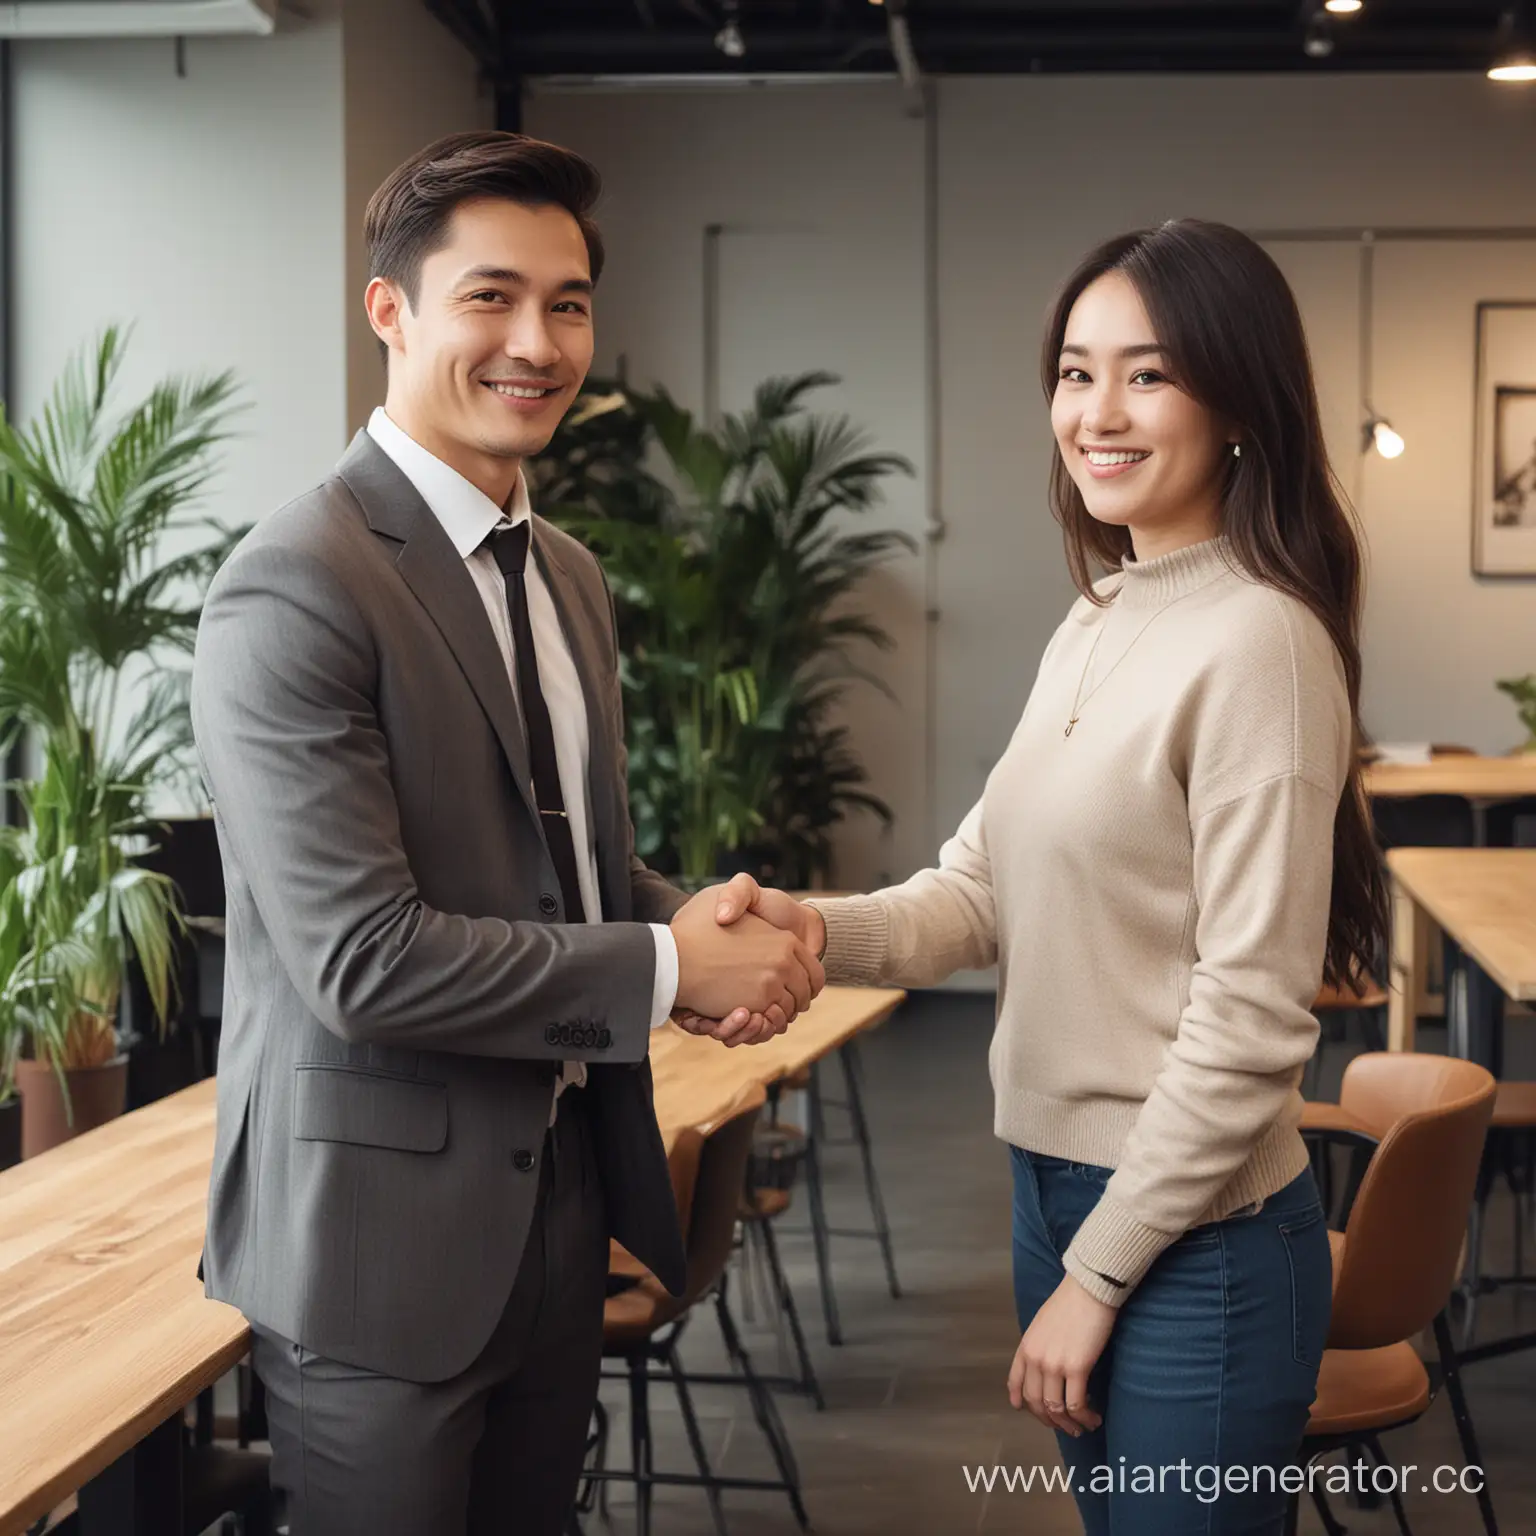 Create an image that captures a diverse, professional moment within a coworking office space. The scene includes four individuals engaged in a friendly handshake, their expressions warm and welcoming.

1. A man of Chinese descent, aged between 25 to 35, has an approachable smile. He dons casual business attire consisting of trousers paired with a sweater or something similar.

2. Next to him, a man of Russian descent, also in the 25 to 35 age range, reflects a similar casual business style. His handshake with the first man suggests a meeting of cultures and cooperation.

3. A woman of Chinese descent, within the same age bracket, stands alongside them. She also showcases a casual and stylish look suitable for an office environment, mirroring the ease and approachability of her companions.

4. Completing the group is a woman of Russian descent, aged 25 to 35, her attire complementary to the others', exuding a relaxed yet professional demeanor.

These individuals are located inside a modern coworking space. The environment bears office-like features with a touch of informality characteristic of contemporary workspaces. Around them is a blend of desks, ergonomic chairs, and decorative indoor plants, providing a collaborative atmosphere where ideas thrive.

They all wear poised smiles that speak of successful collaboration and the joy of partnership in a multicultural setting. Their body language and expressions exude confidence and mutual respect, capturing the very essence of a coworking synergy.